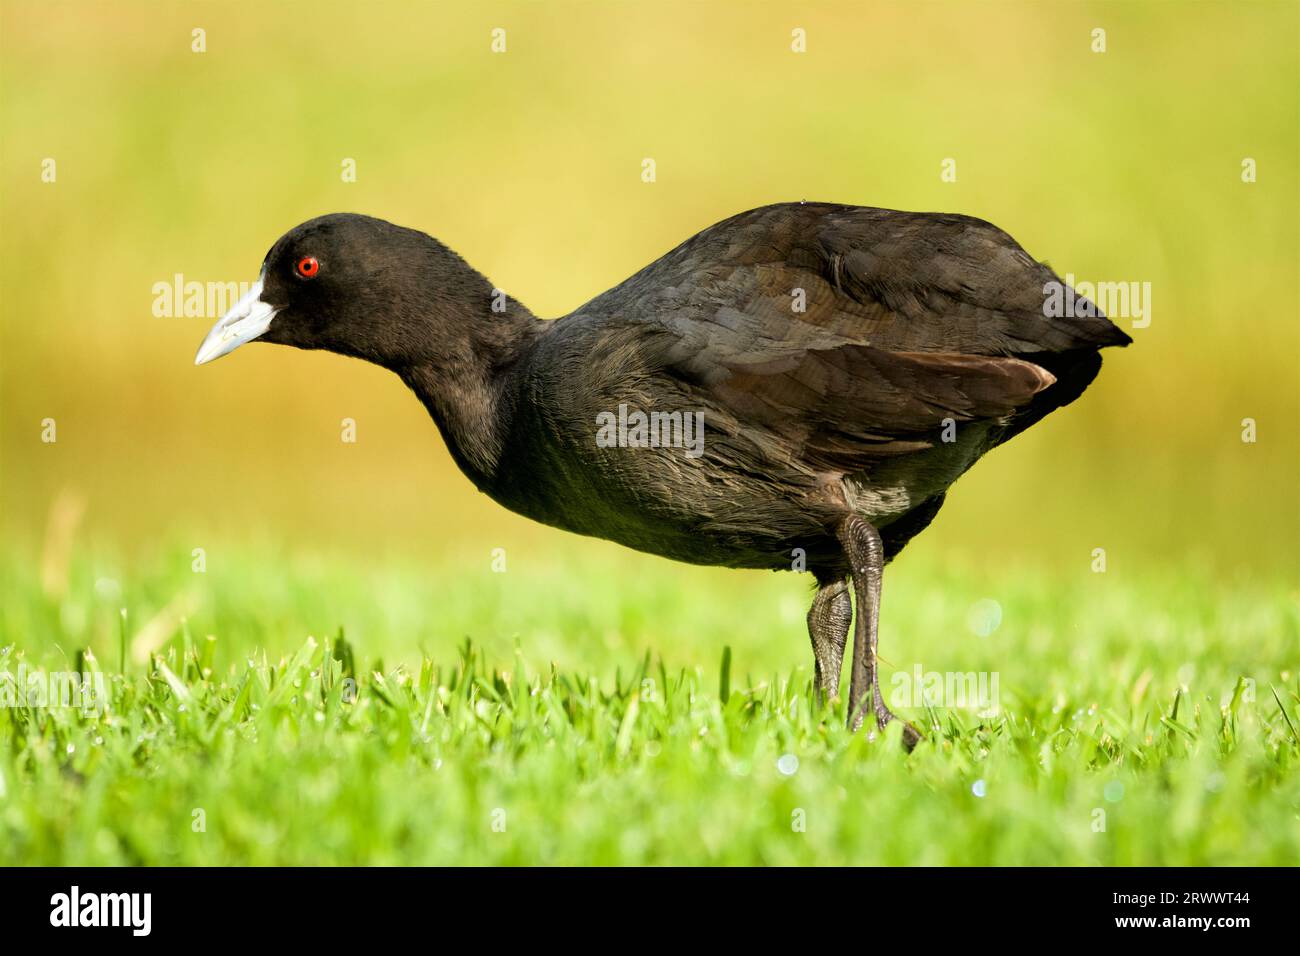 A Eurasian Coot, Fulica atra, also known as an Australian Coot and Common Coot, feeding in the grass next to Herdsman Lake, Perth, Western Australia. Stock Photo